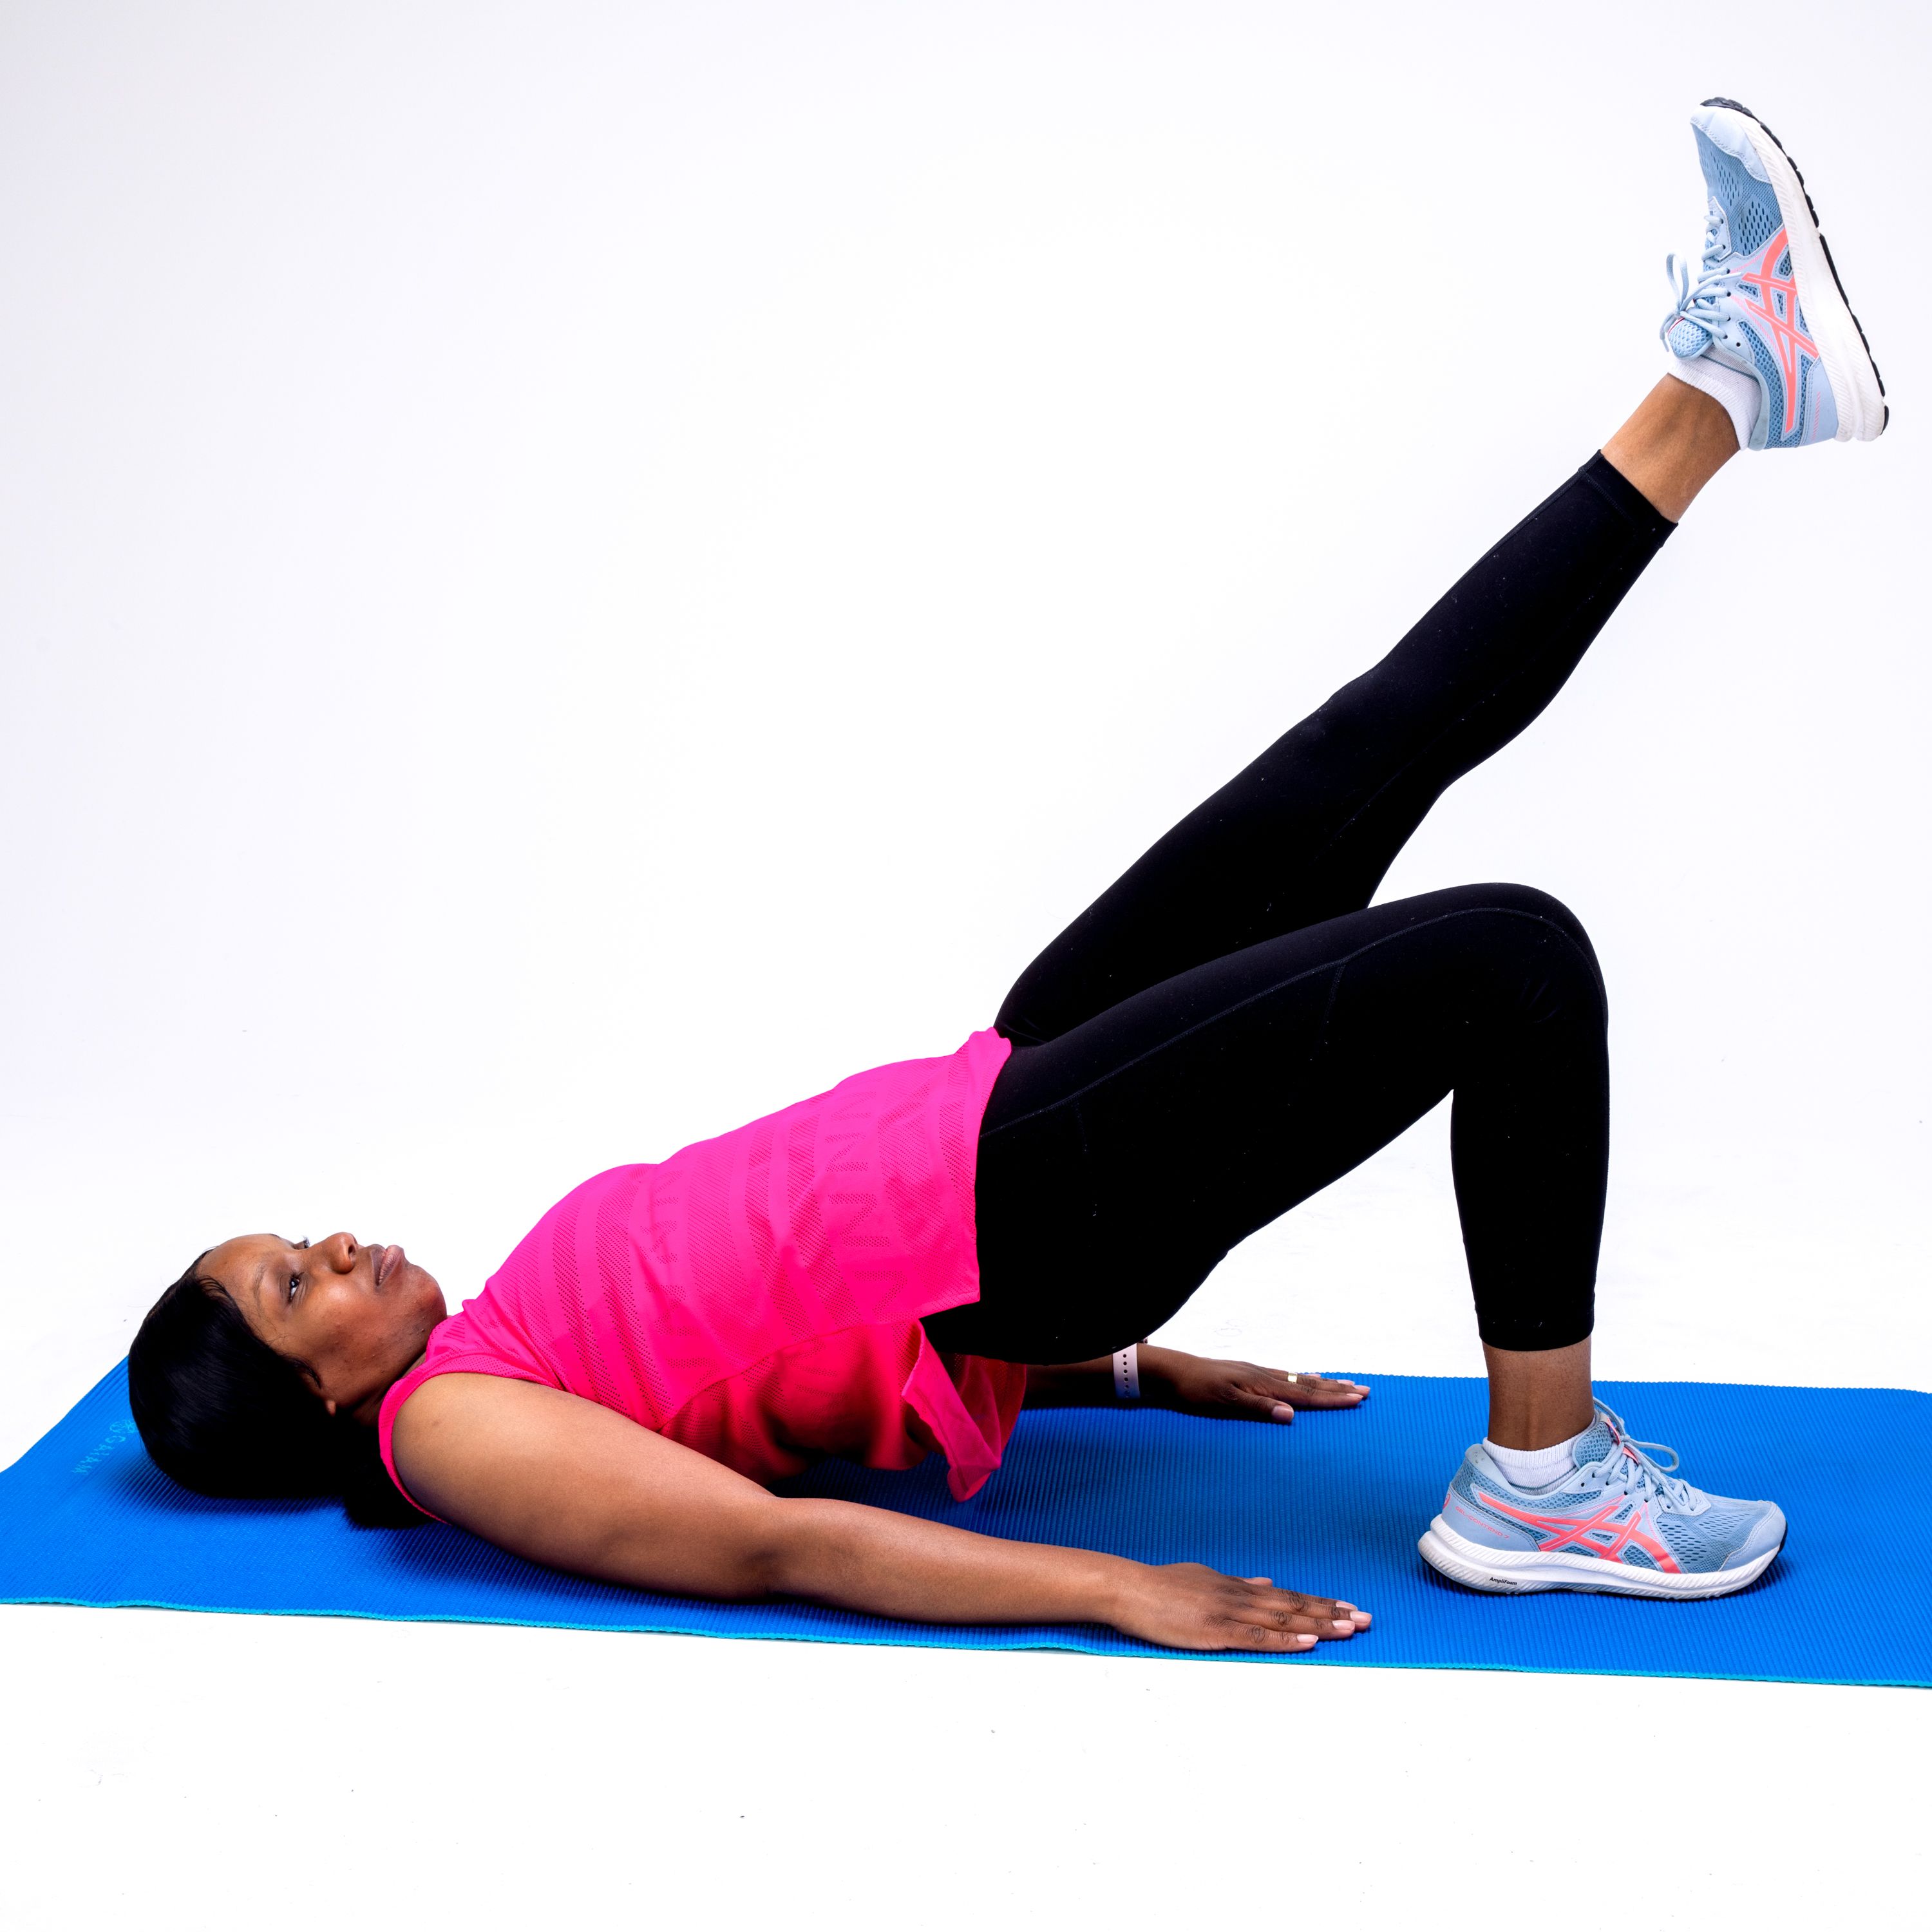 Stretch Band with Dynamic Strengthening Exercises